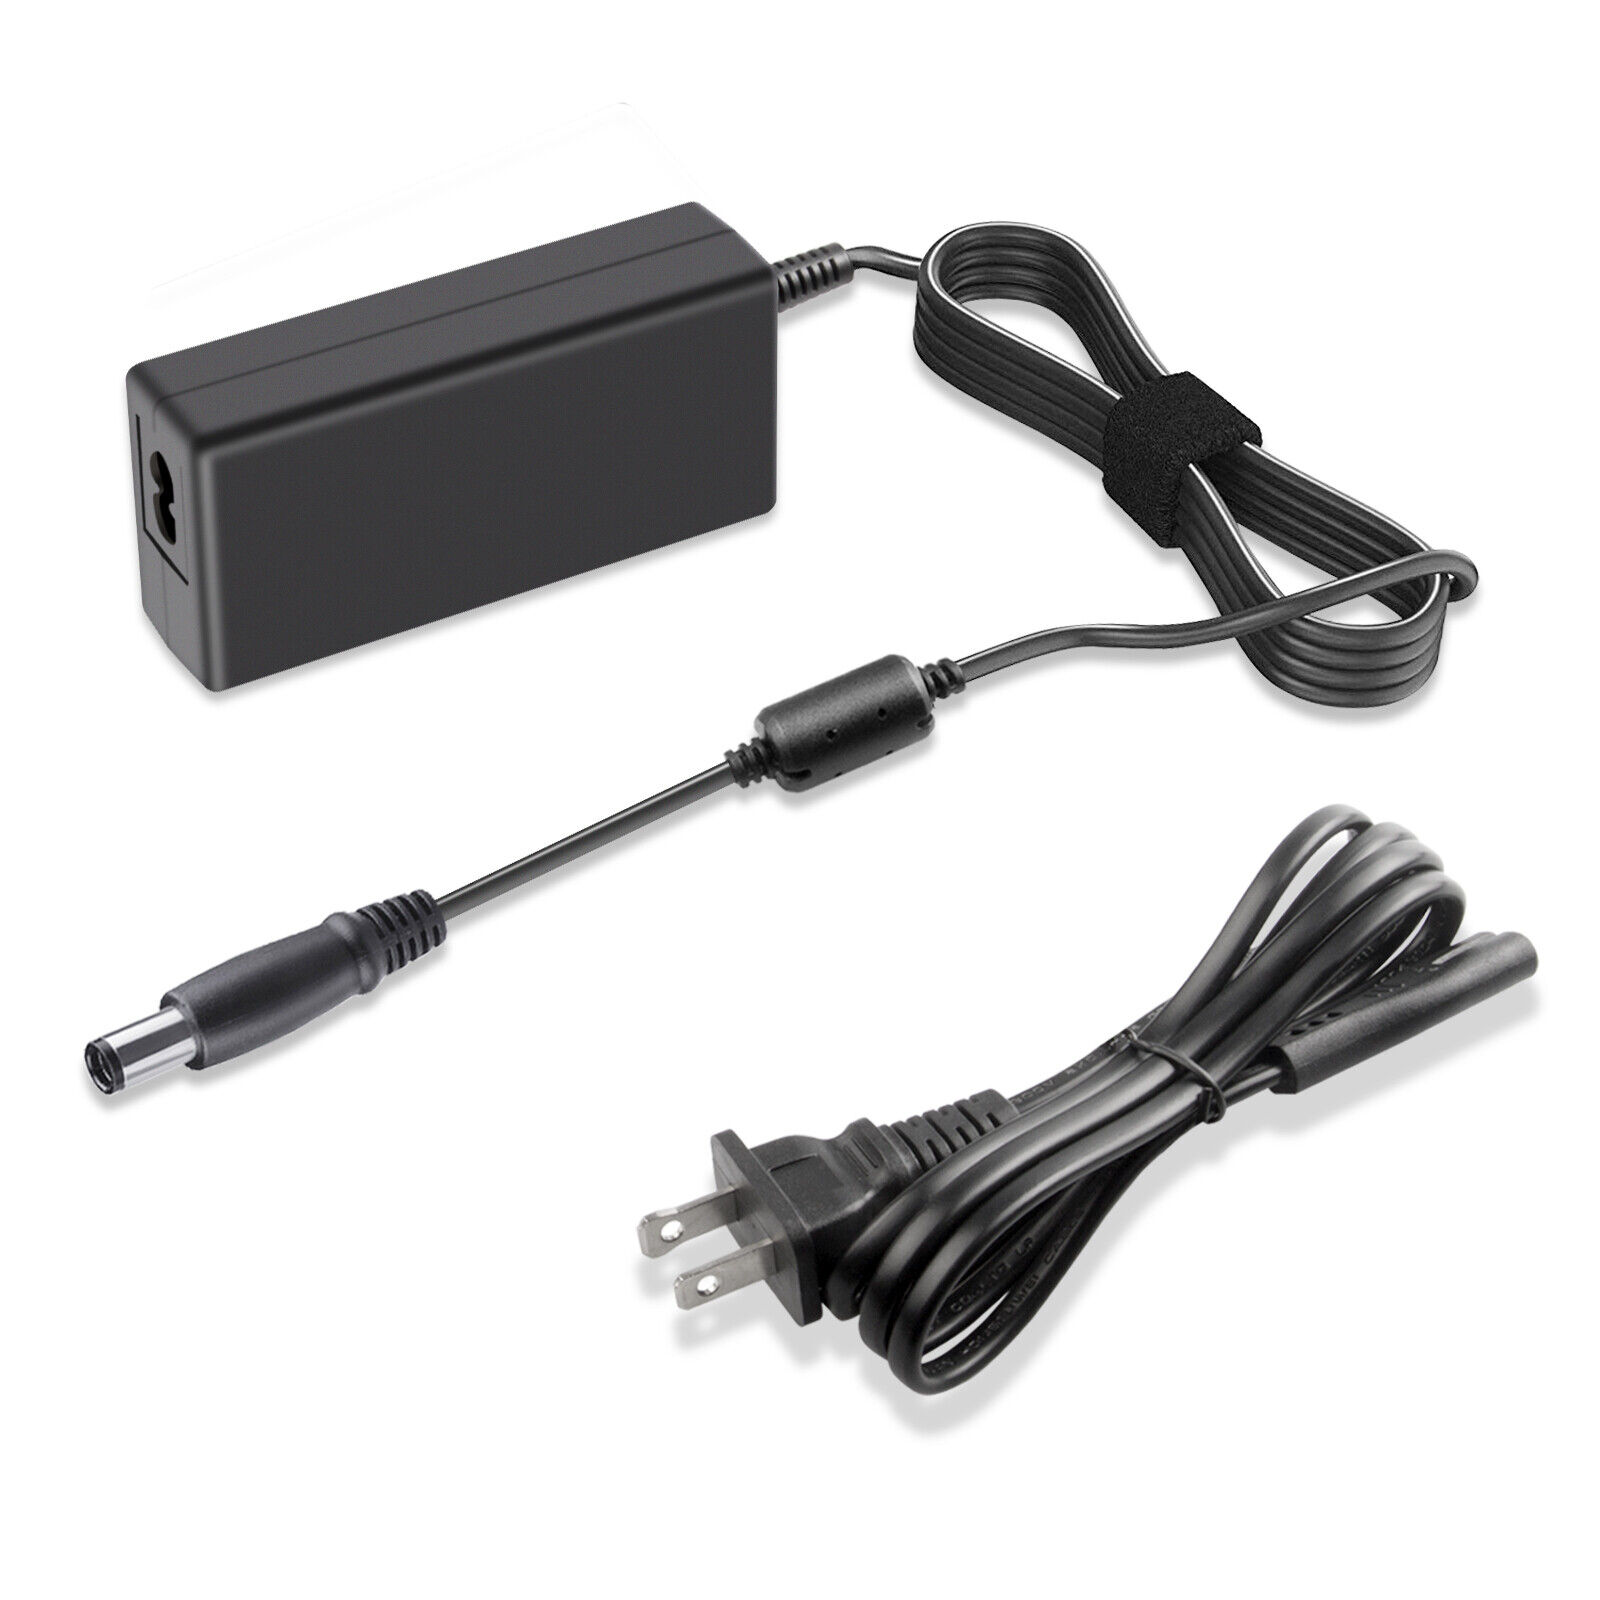 For HP Thin Client T520 T610 T620 18.5V 65W AC Adapter Charger Power Supply Cord